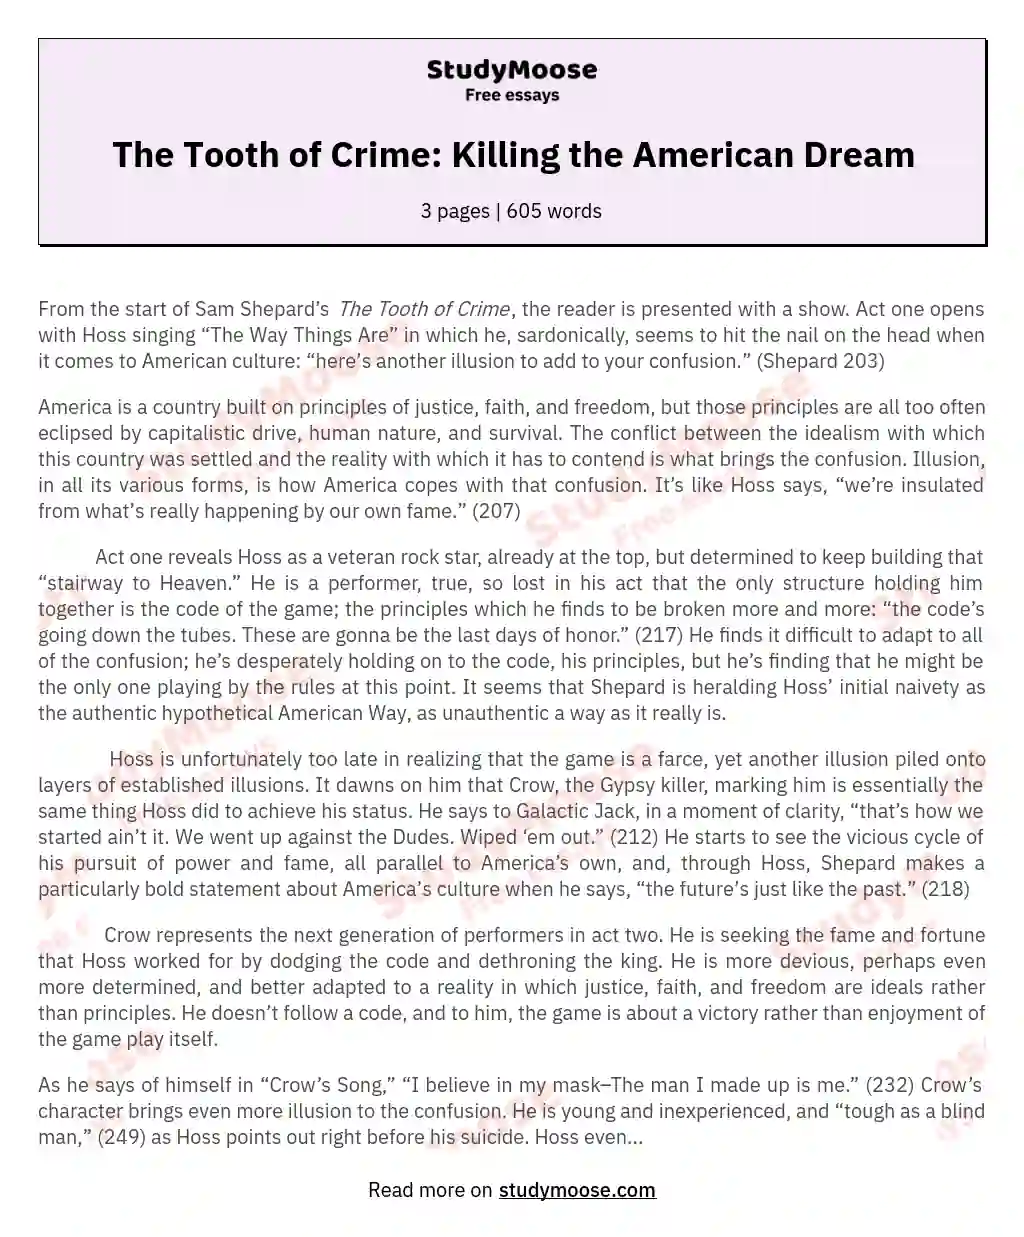 The Tooth of Crime: Killing the American Dream essay